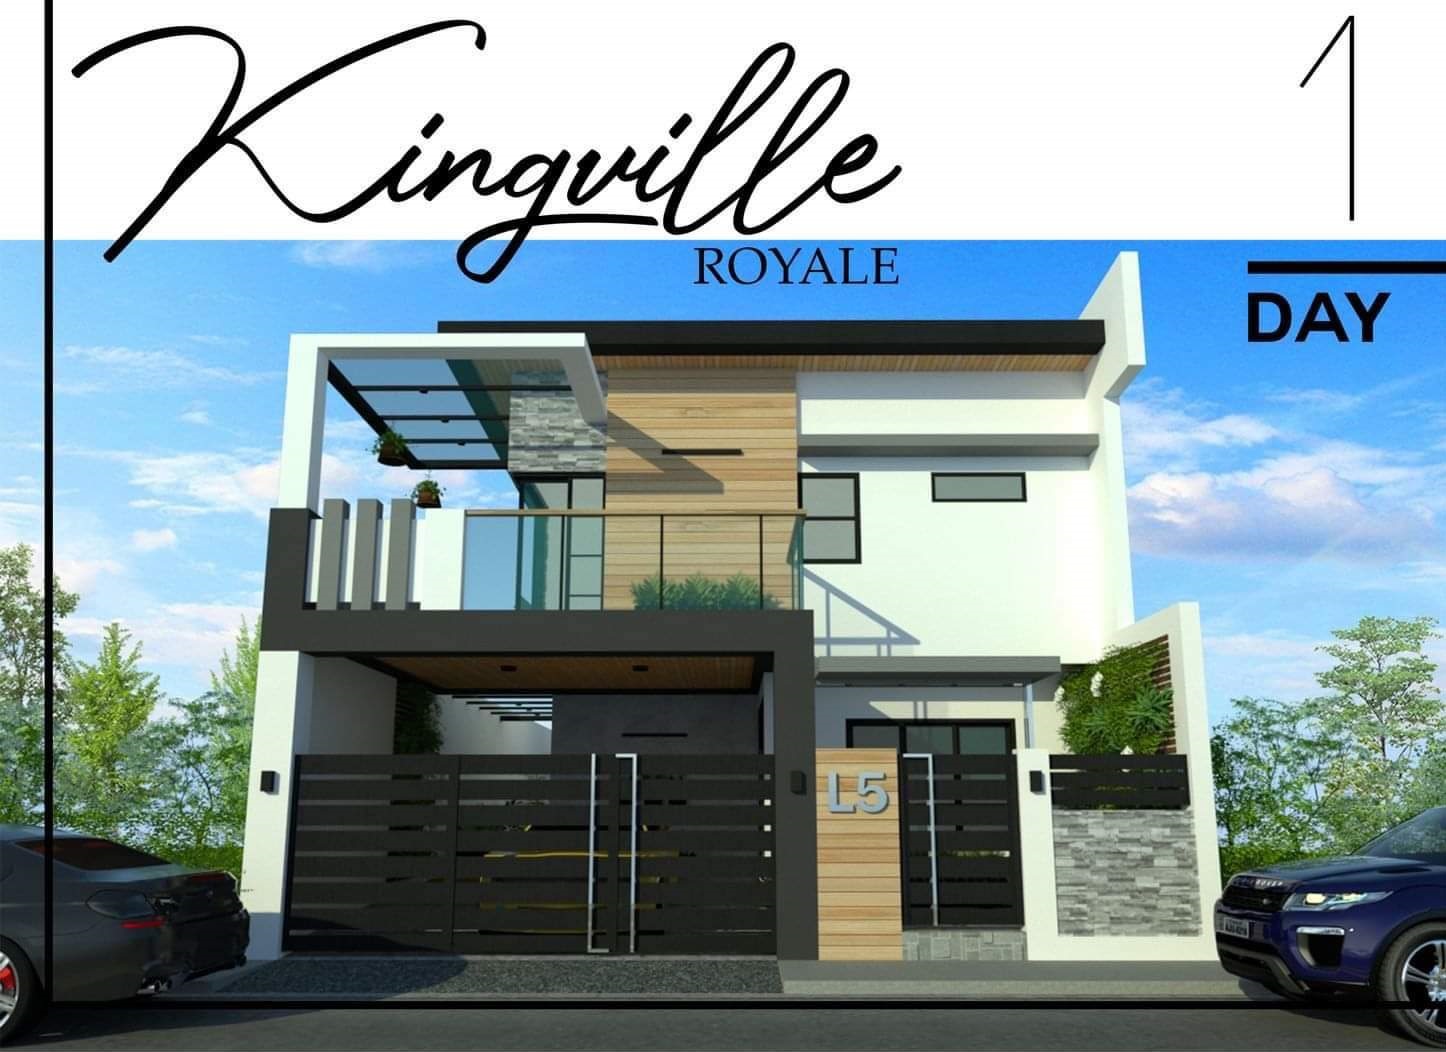 Pre-Selling House and Lot in Kingsville Royale, Antipolo City